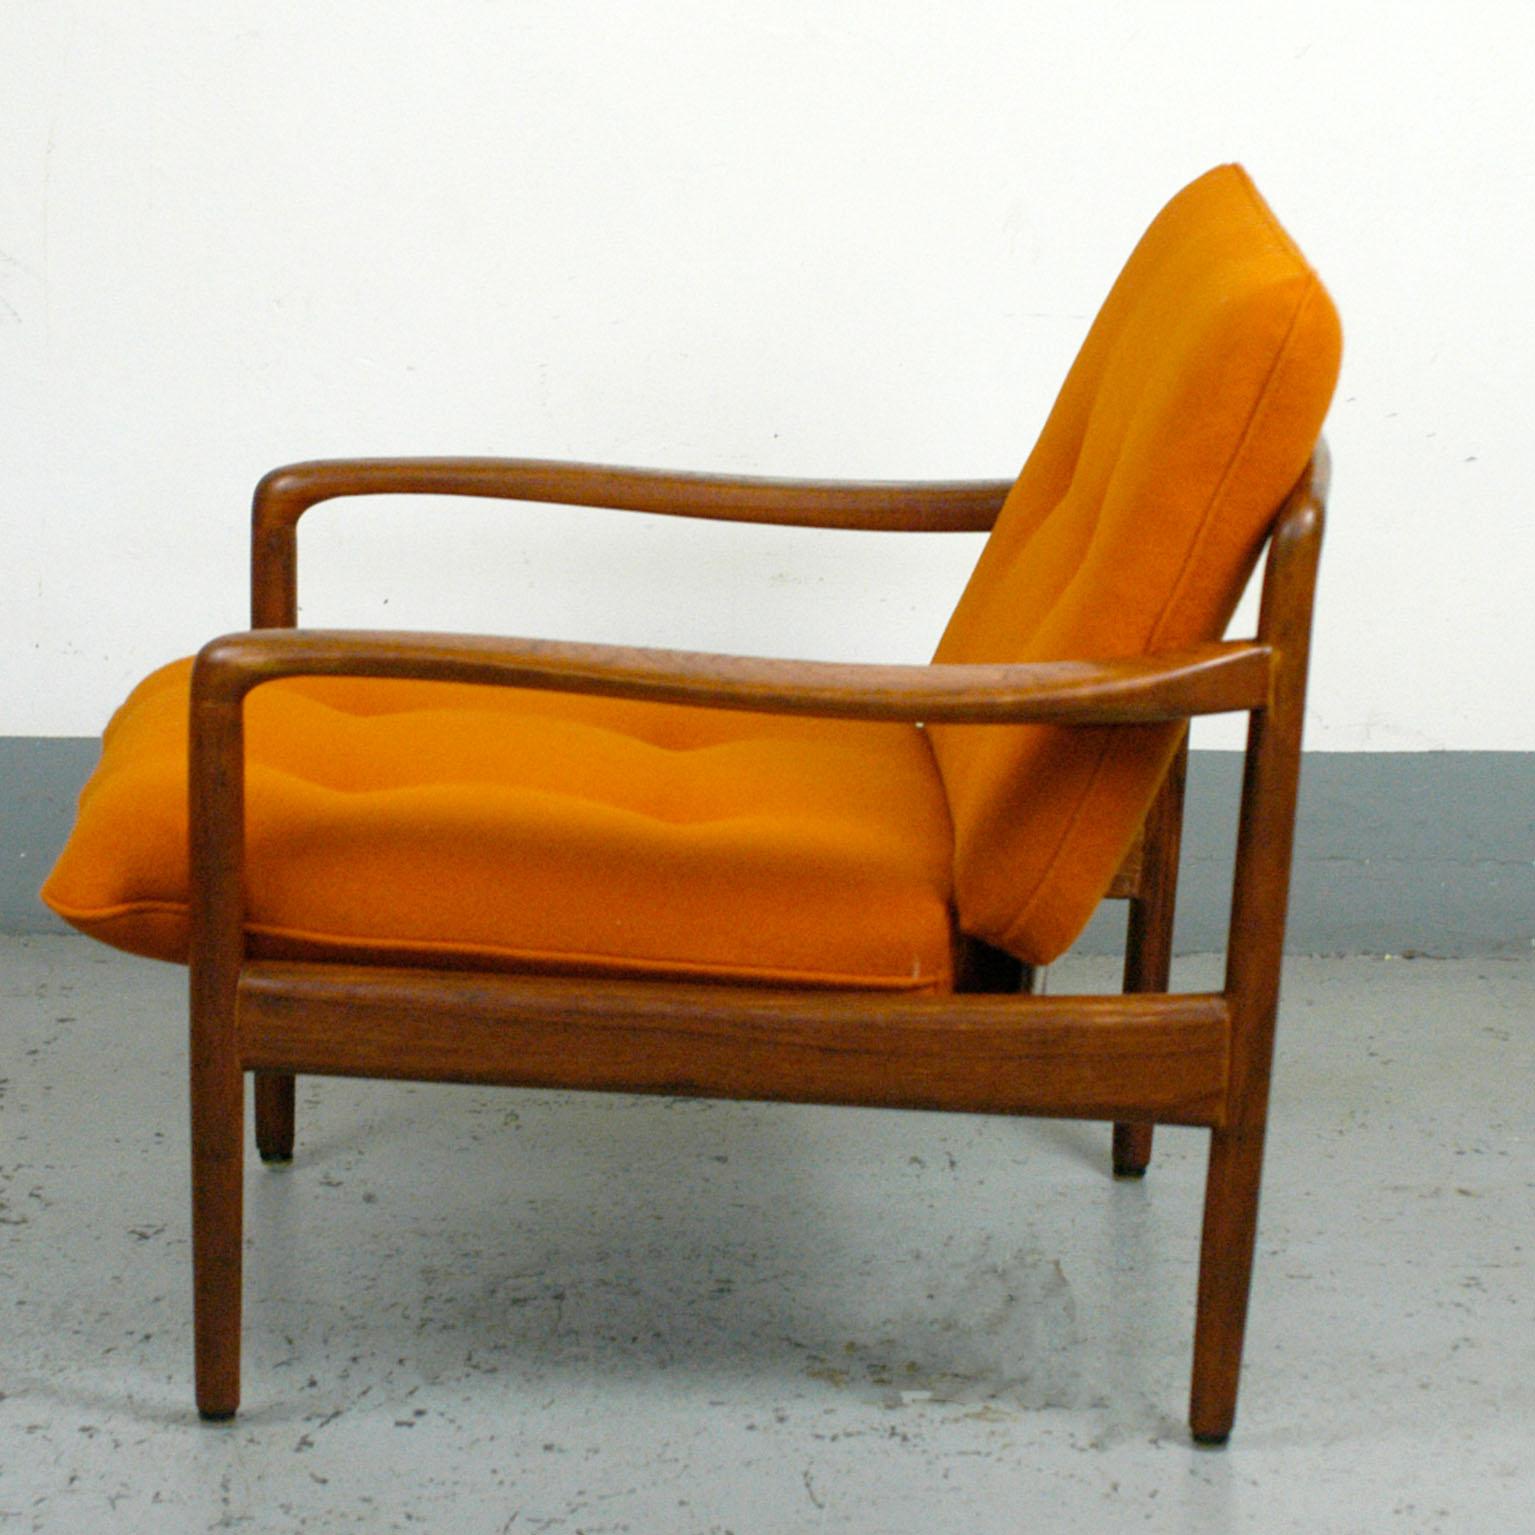 Organic 1960s teak easy chair, in very good condition with new Kvadrat fabric upholsterd cushions by Knoll Antimott, Germany 1960s, Mid-Century Modern design. The legendary 